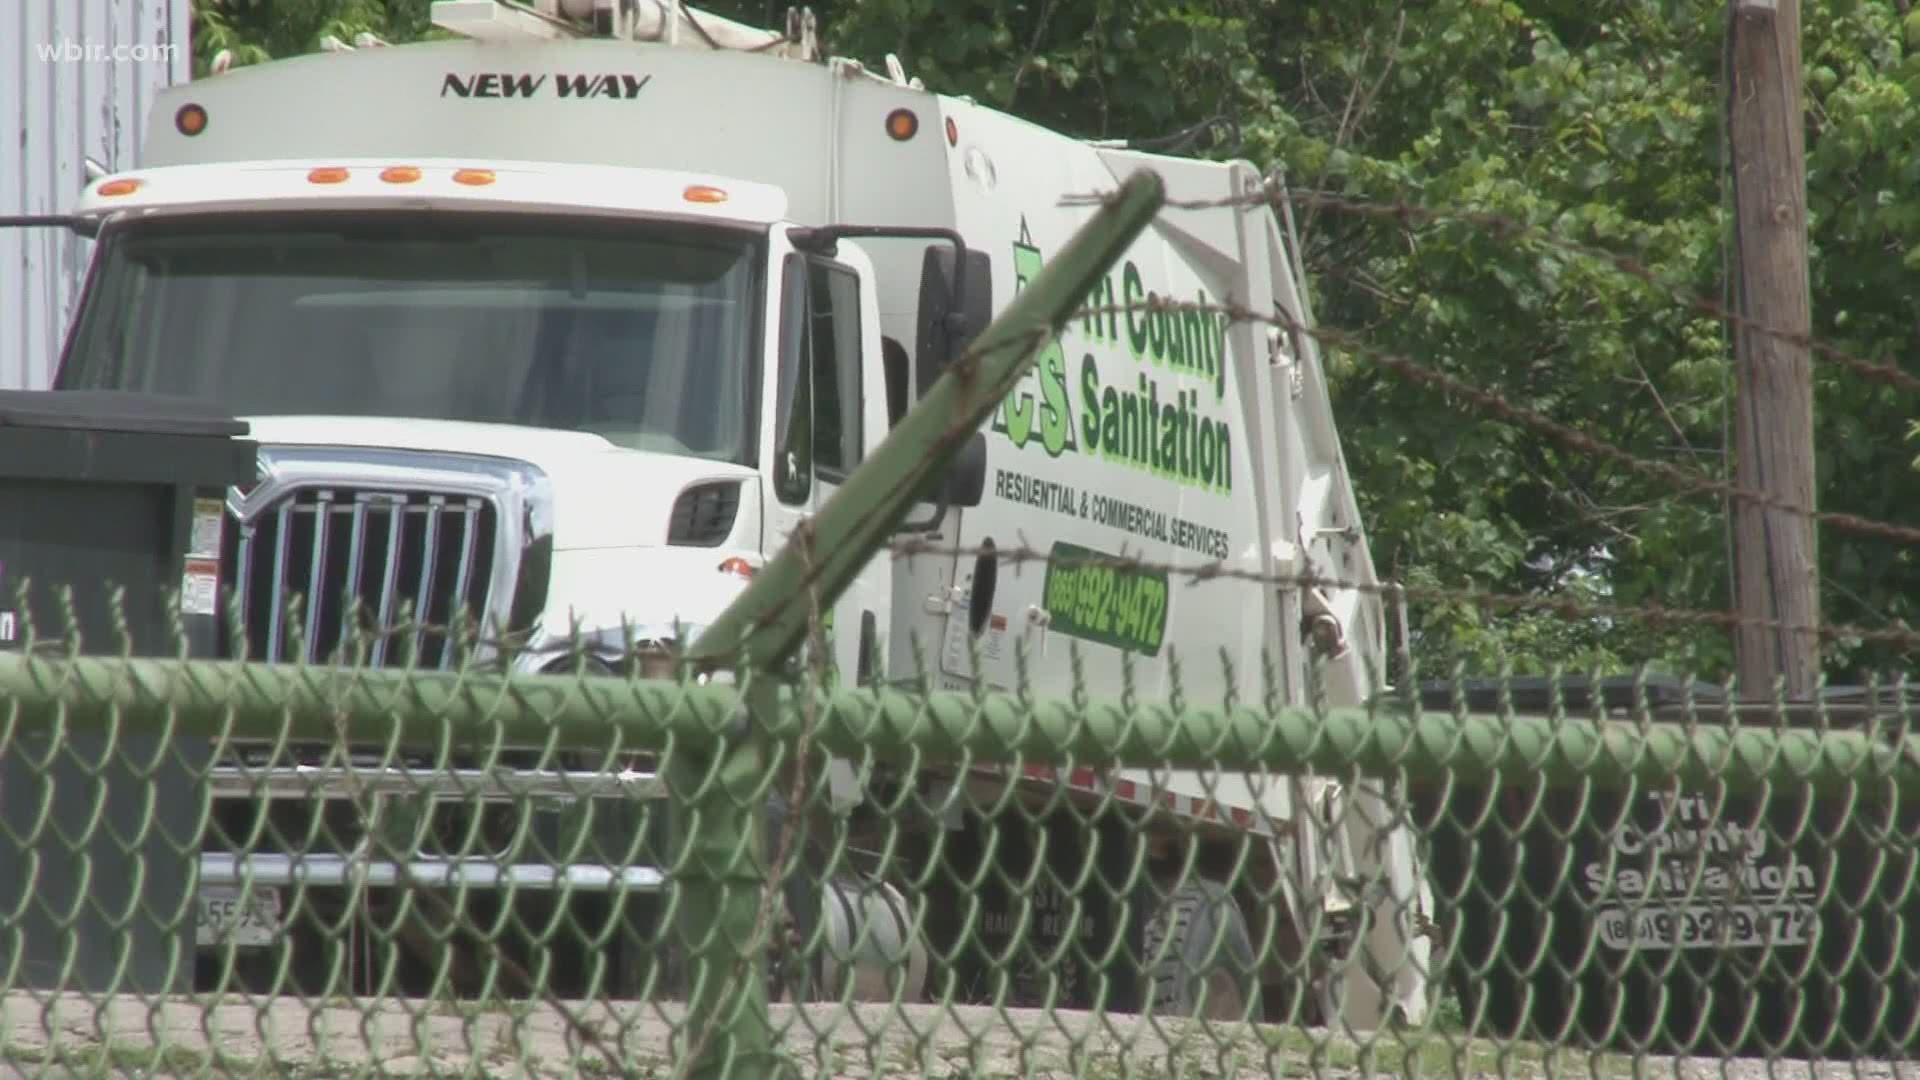 Viewers from Knoxville and Maynardville sent messages -- worried about the sudden shut-down of their trash collection service.